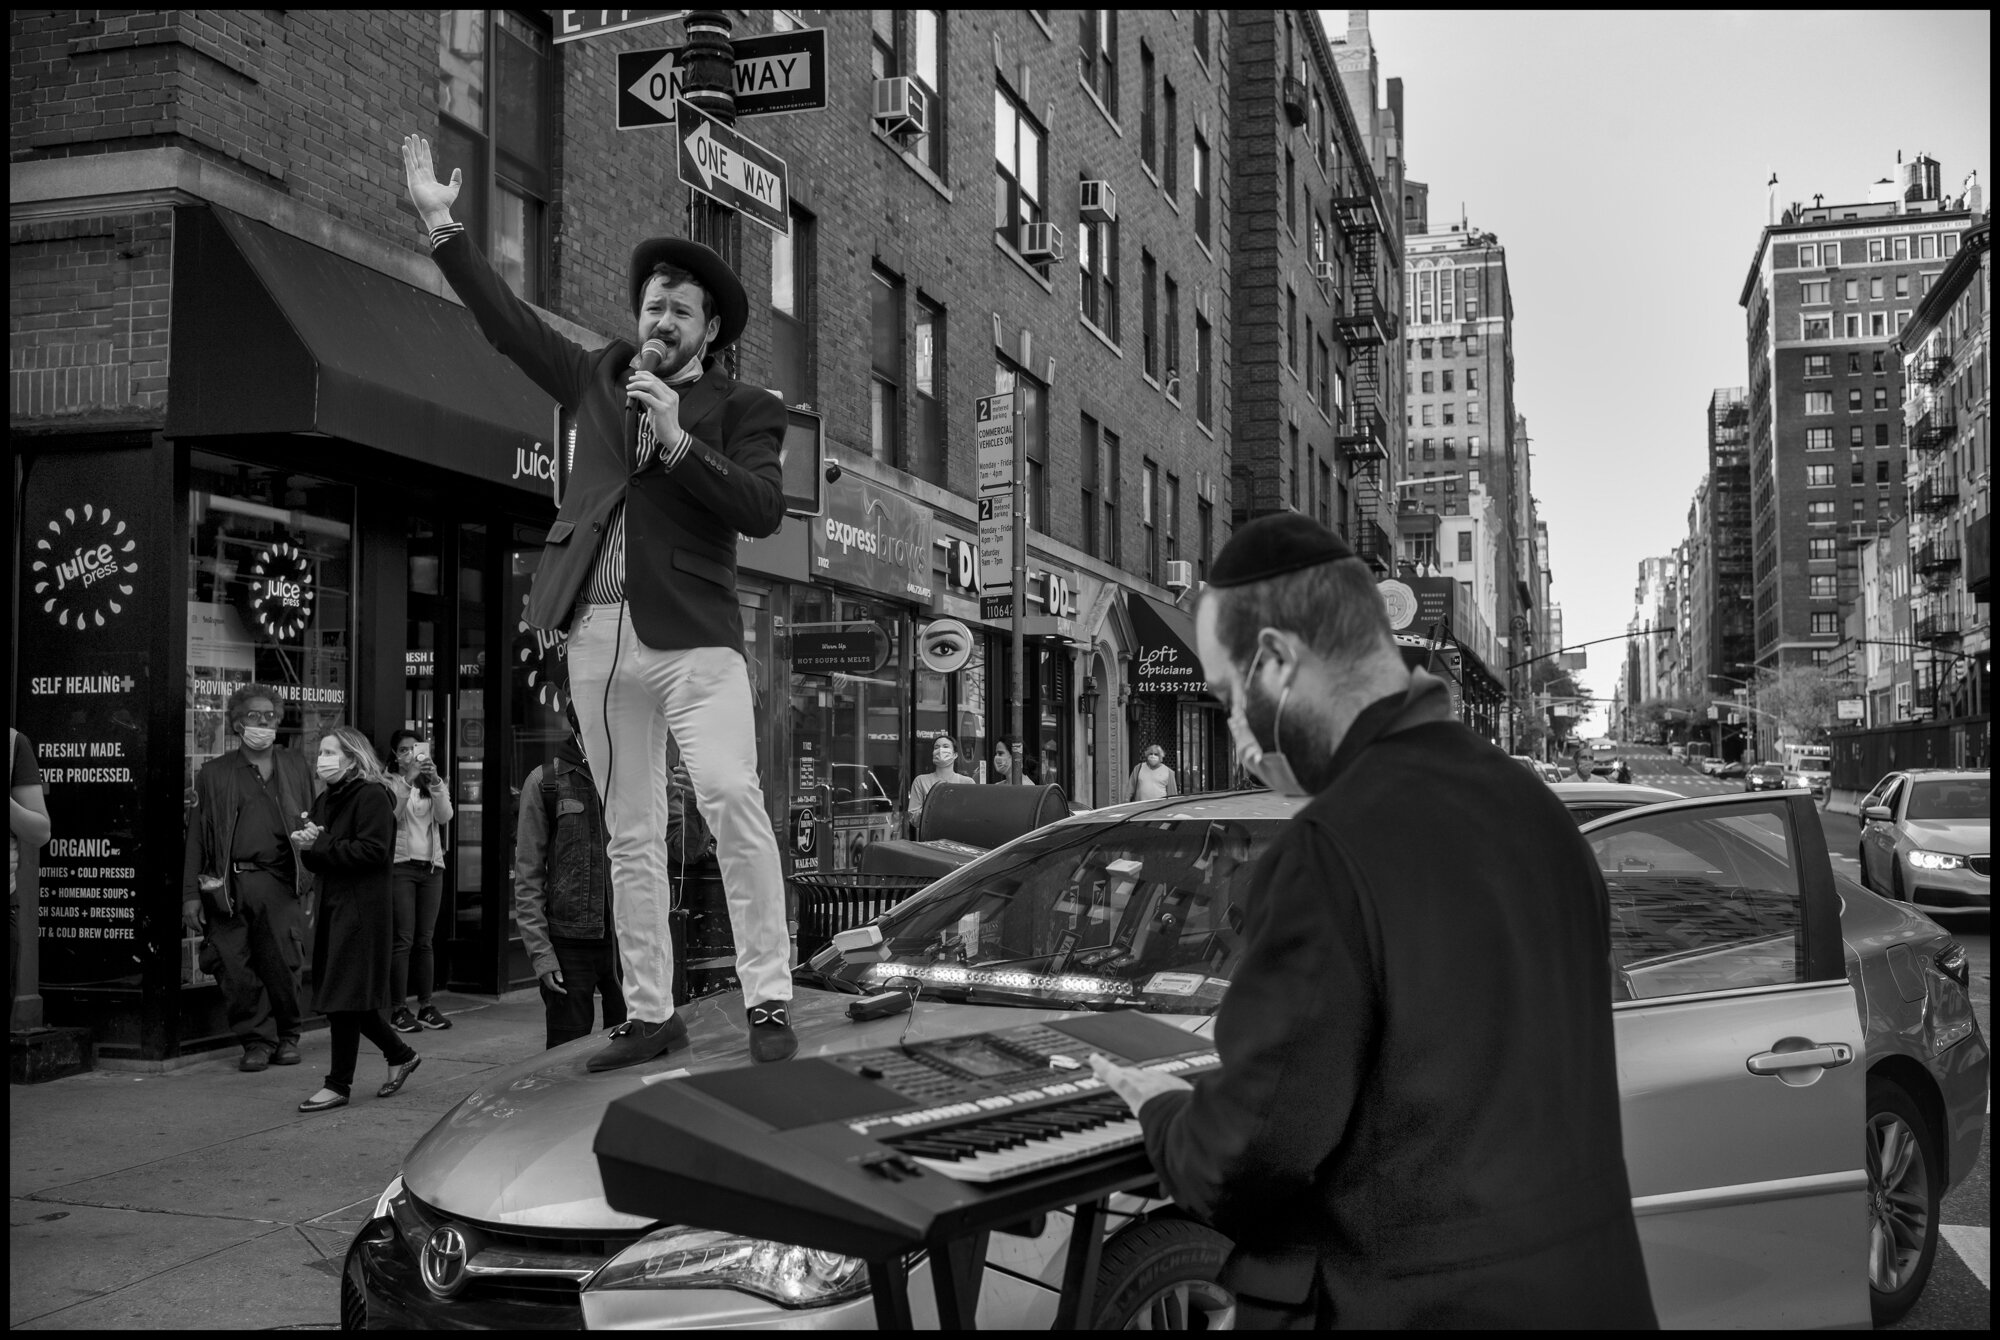  Young man sings from atop a car, “America the Beautiful”, at 7pm on Mother’s Day.  May 10, 2020. © Peter Turnley.   ID# 42-010 